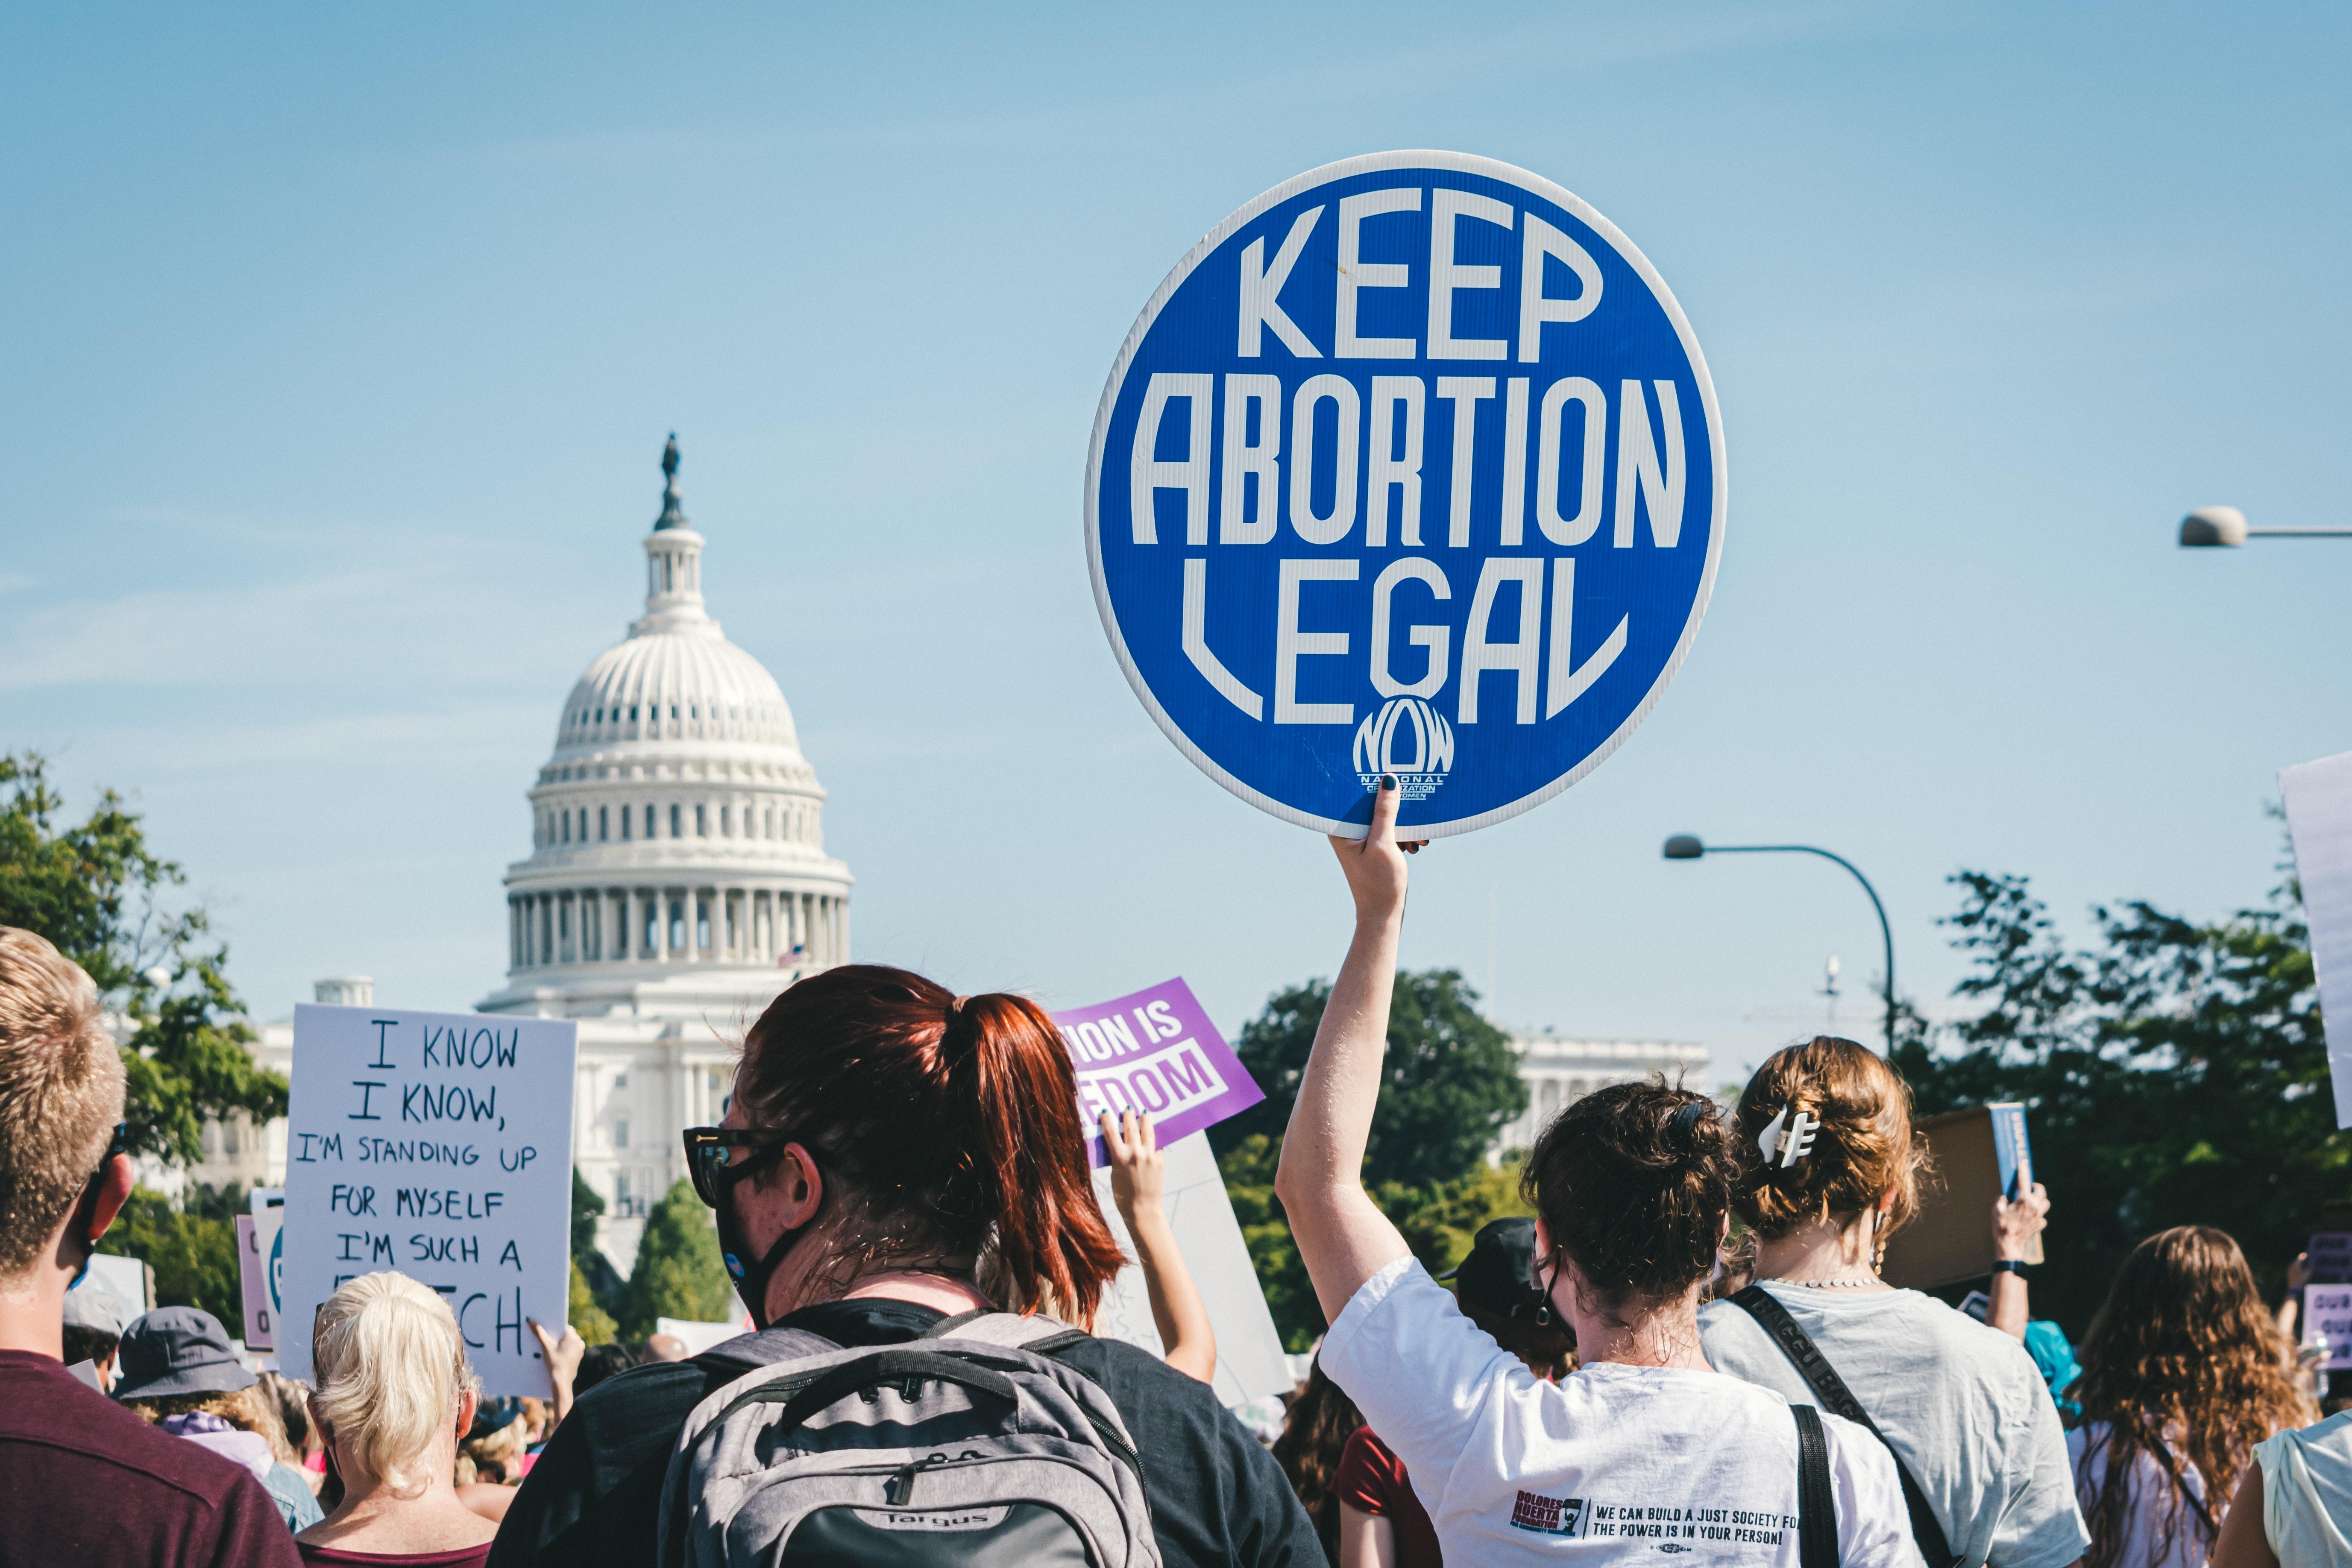 a protester holds up a sign saying "keep abortion legal"